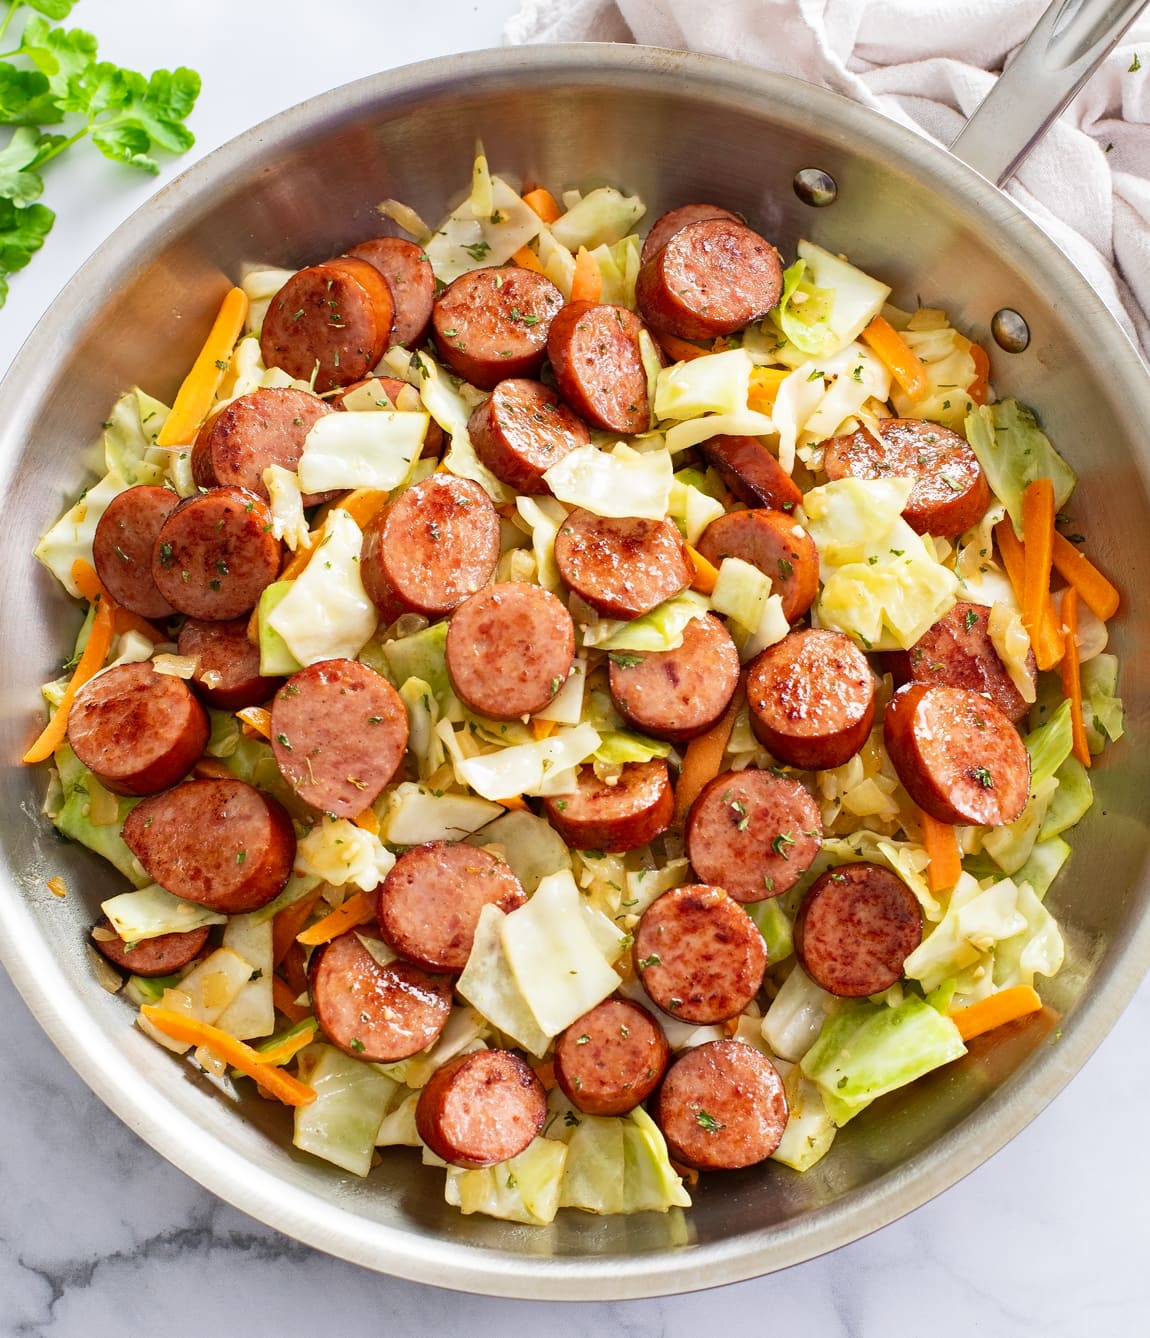 Cabbage and Sausage in a skillet with slices of carrots and parsley.